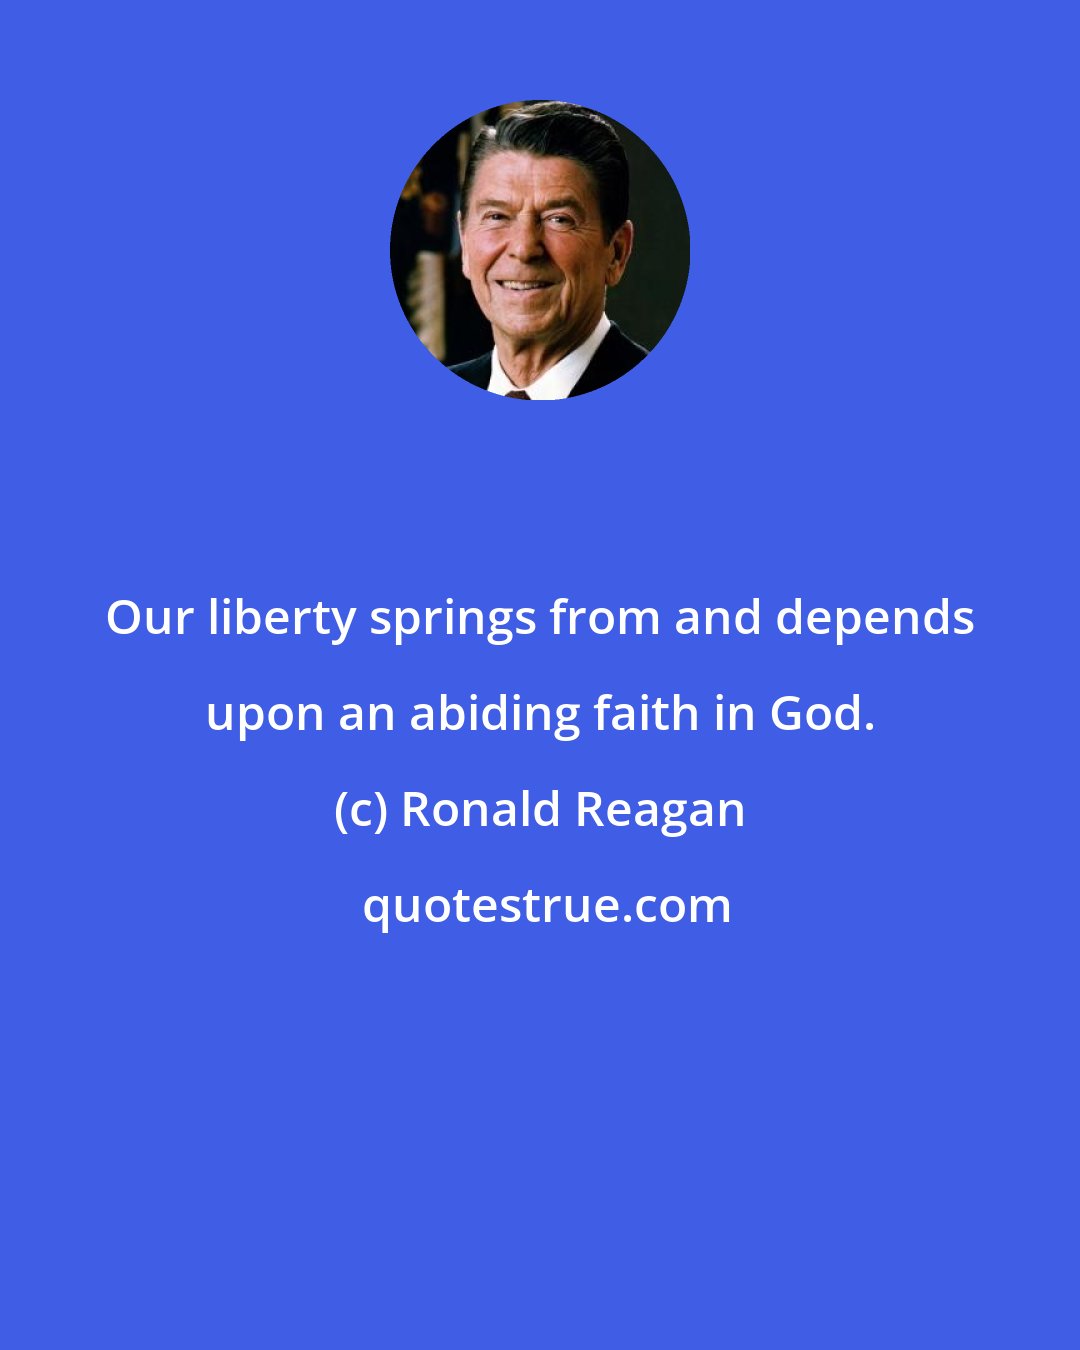 Ronald Reagan: Our liberty springs from and depends upon an abiding faith in God.